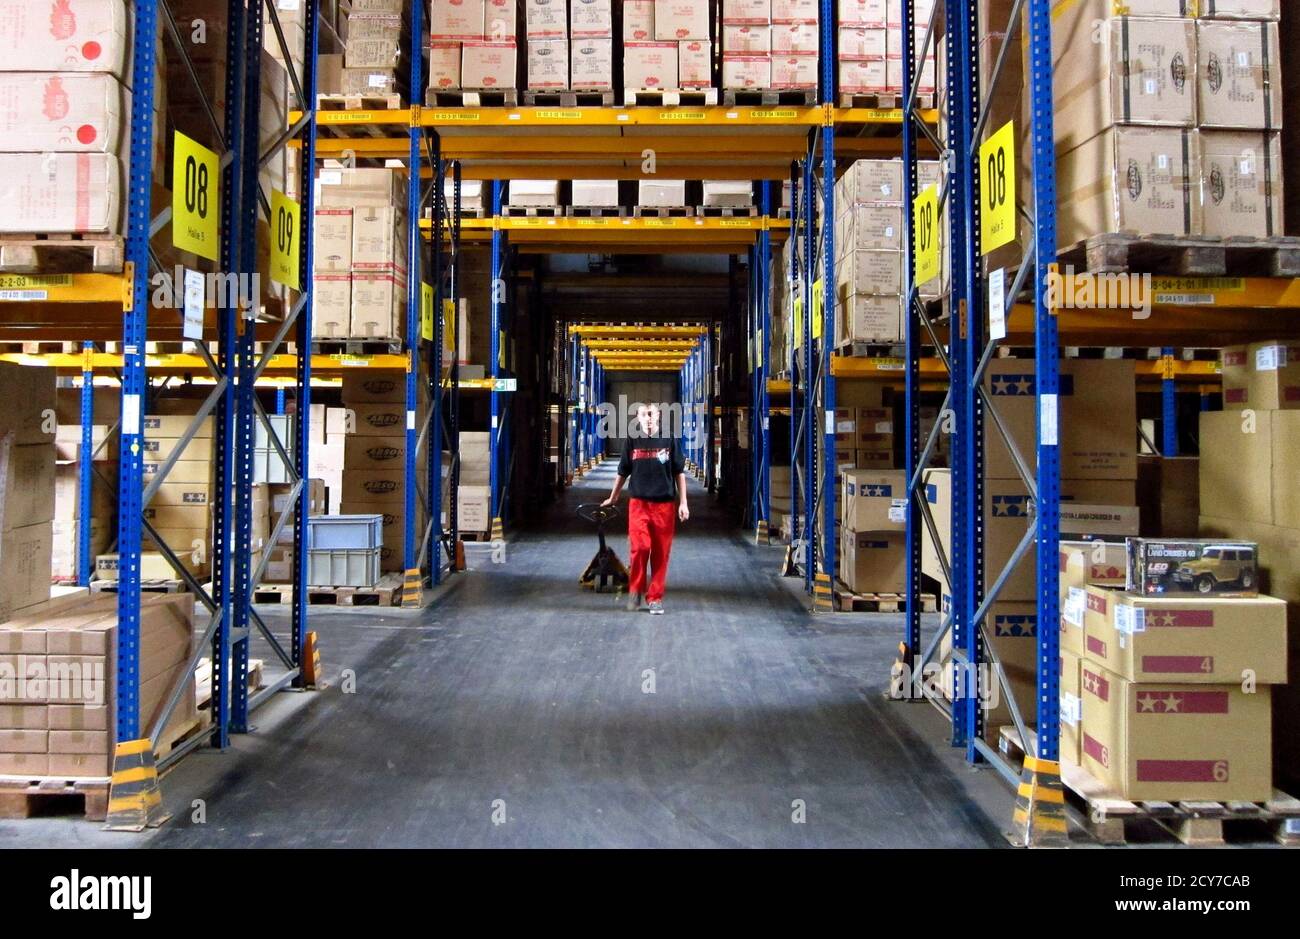 A worker pulls a pallet truck through one of the warehouses at toy company  Simba Dickie's logistics centre in Sonneberg, eastern Germany, October 9,  2014. Once hemmed in by the Iron Curtain,